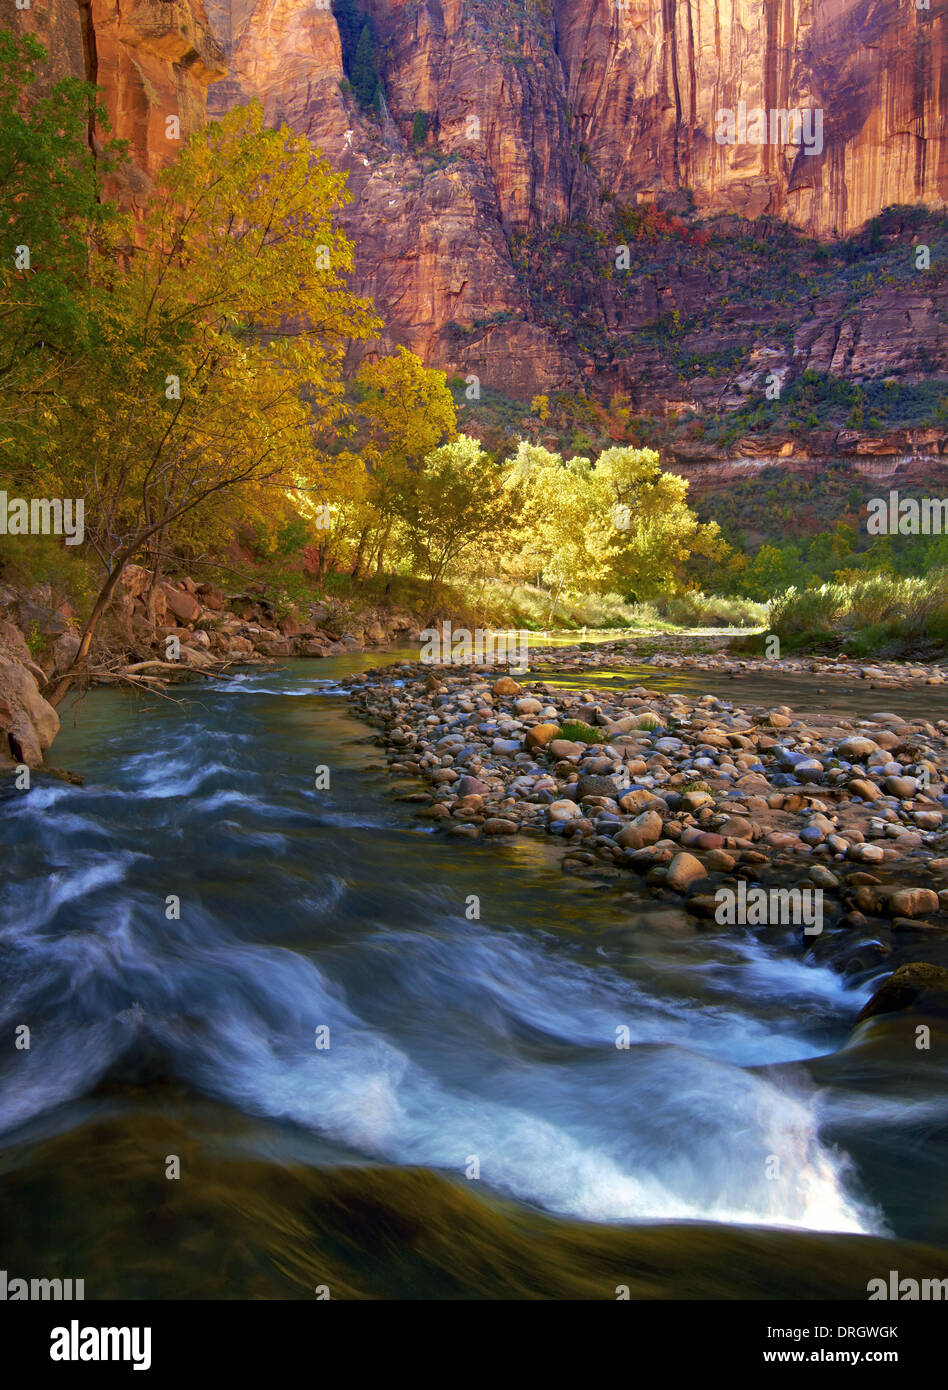 A view along the Virgin River in the Zion National Park, USA Stock Photo